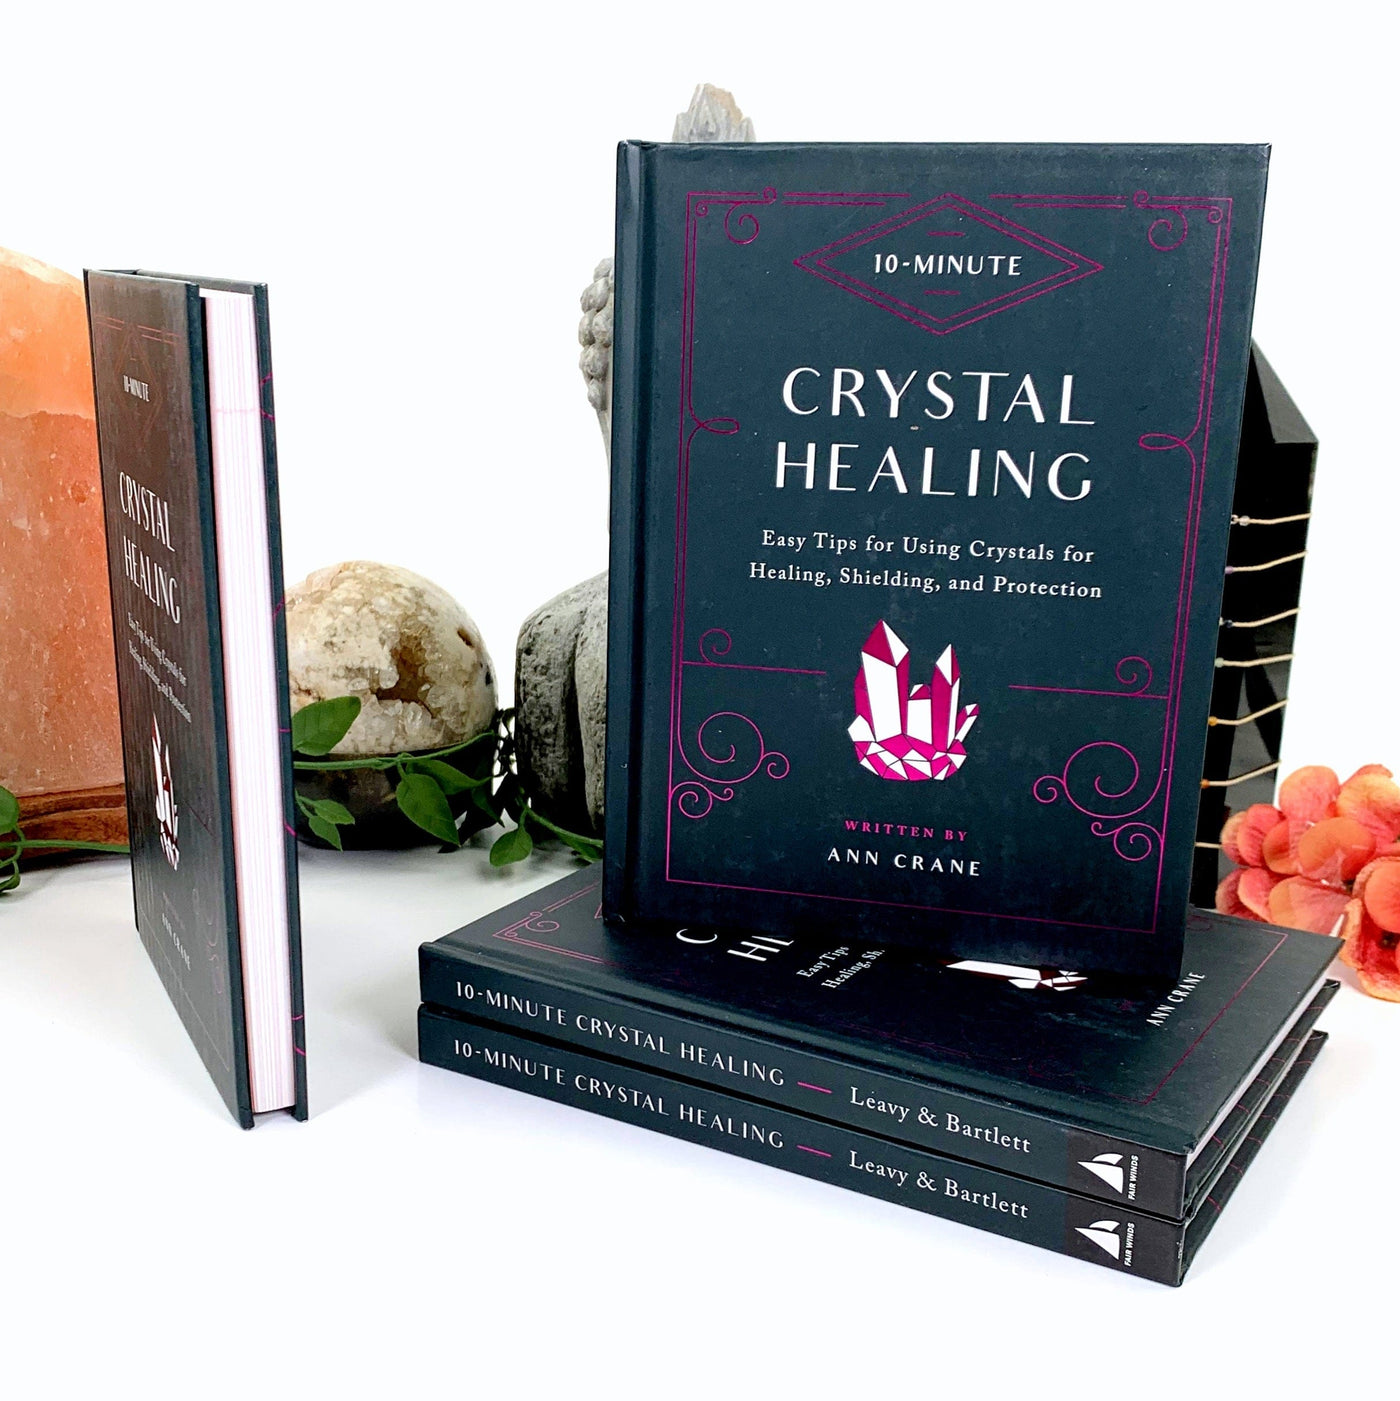 Four 10-Minute Crystal Healing by Ann Crane Books, one displaying the side view.